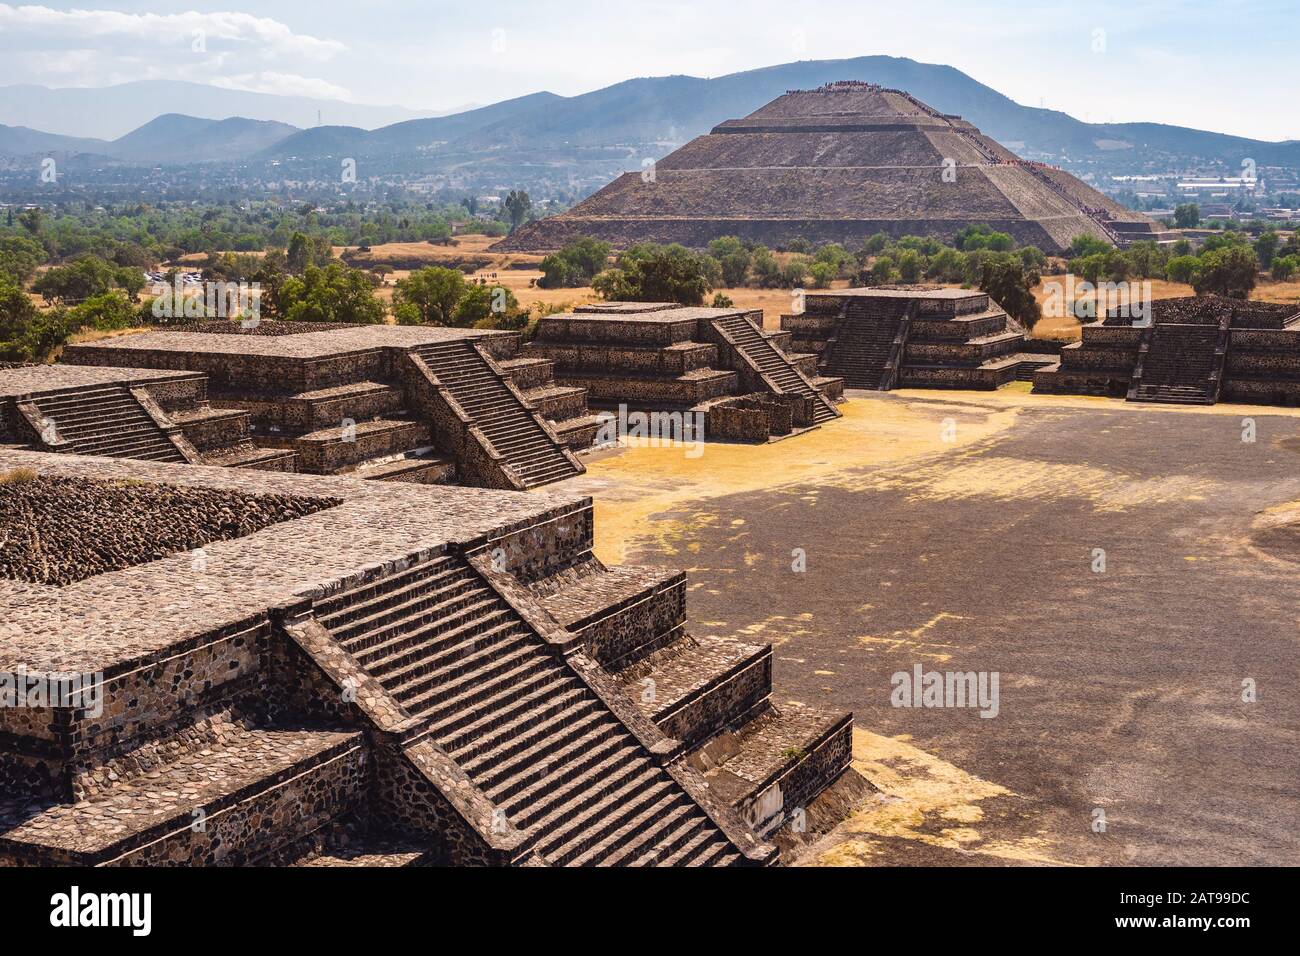 View of the Pyramid of the Sun and ruins at the ancient Aztec city of Teotihuacan, near Mexico City, Mexico. Stock Photo